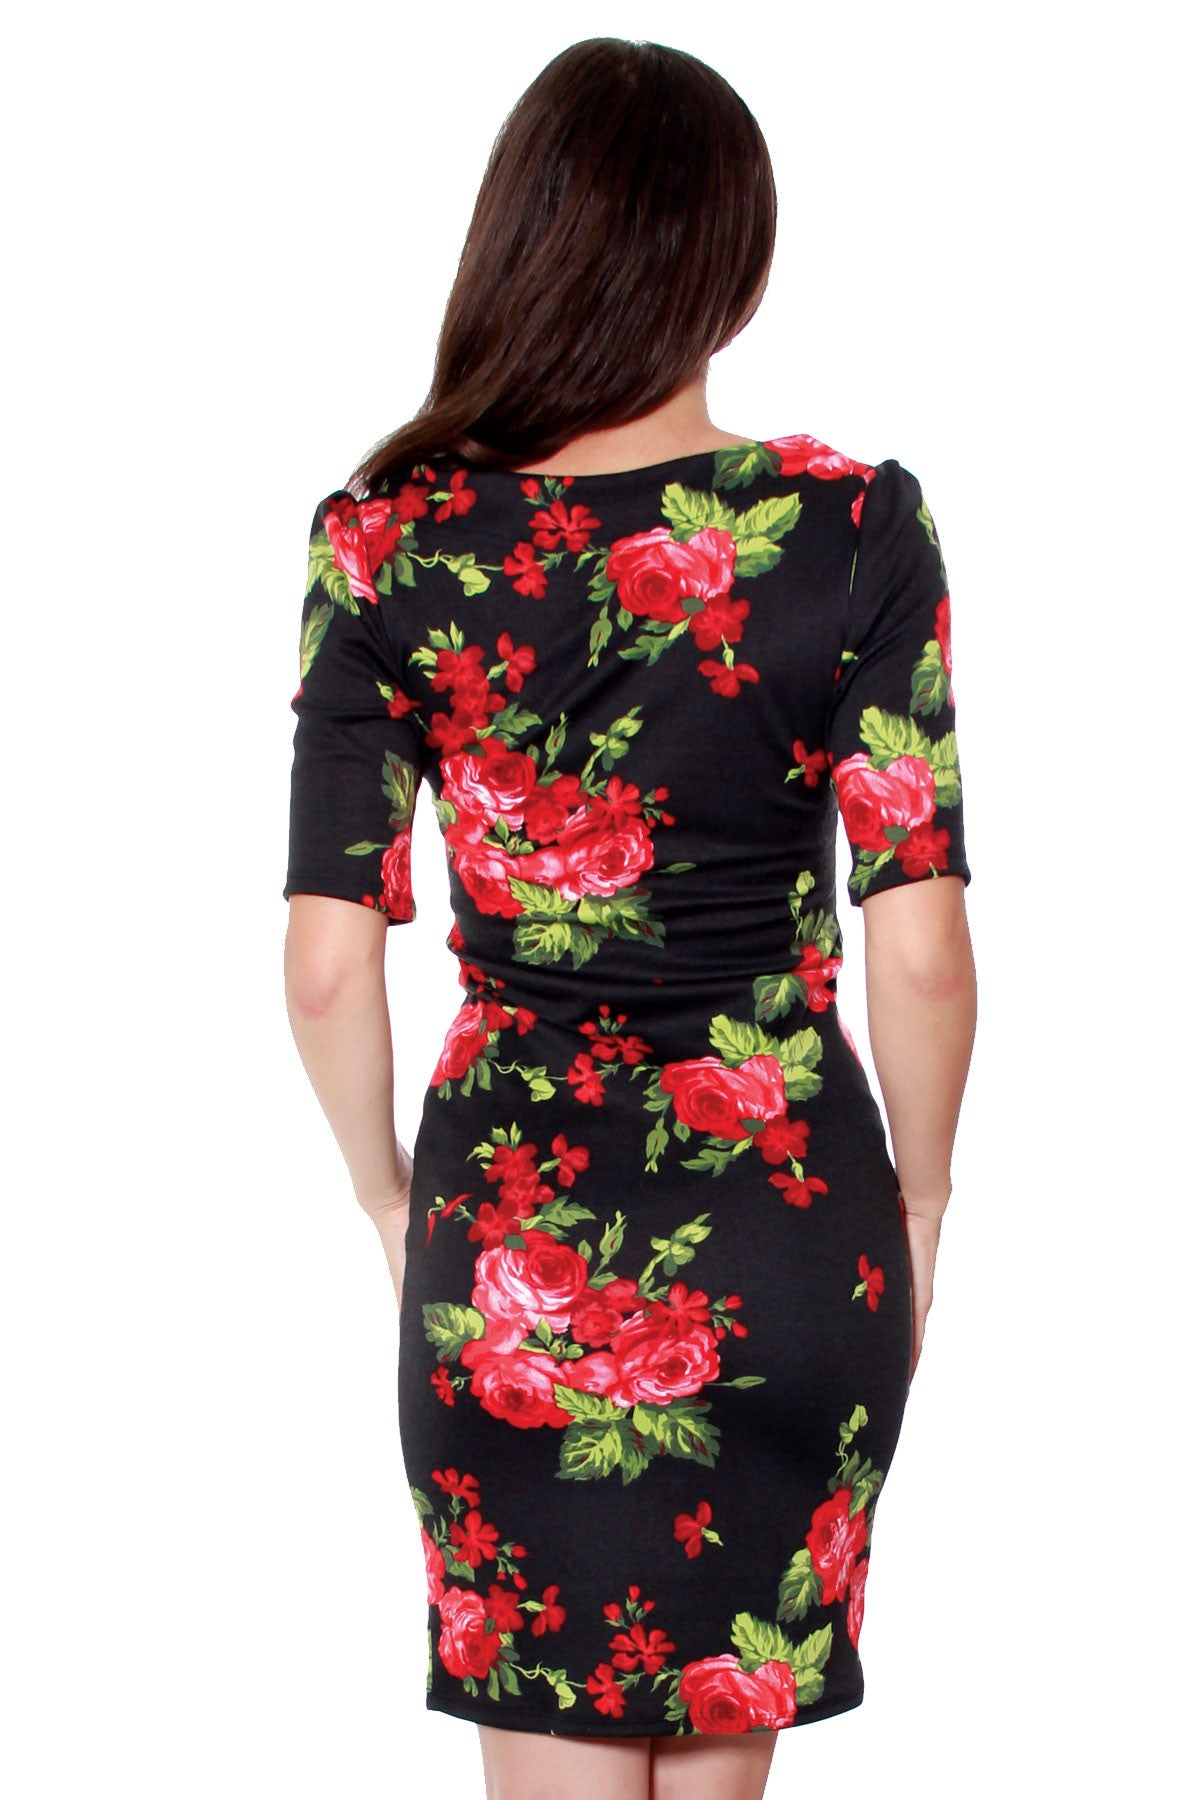 Jessica Louise Natalia Roses Body Con Dress Plus Size Available